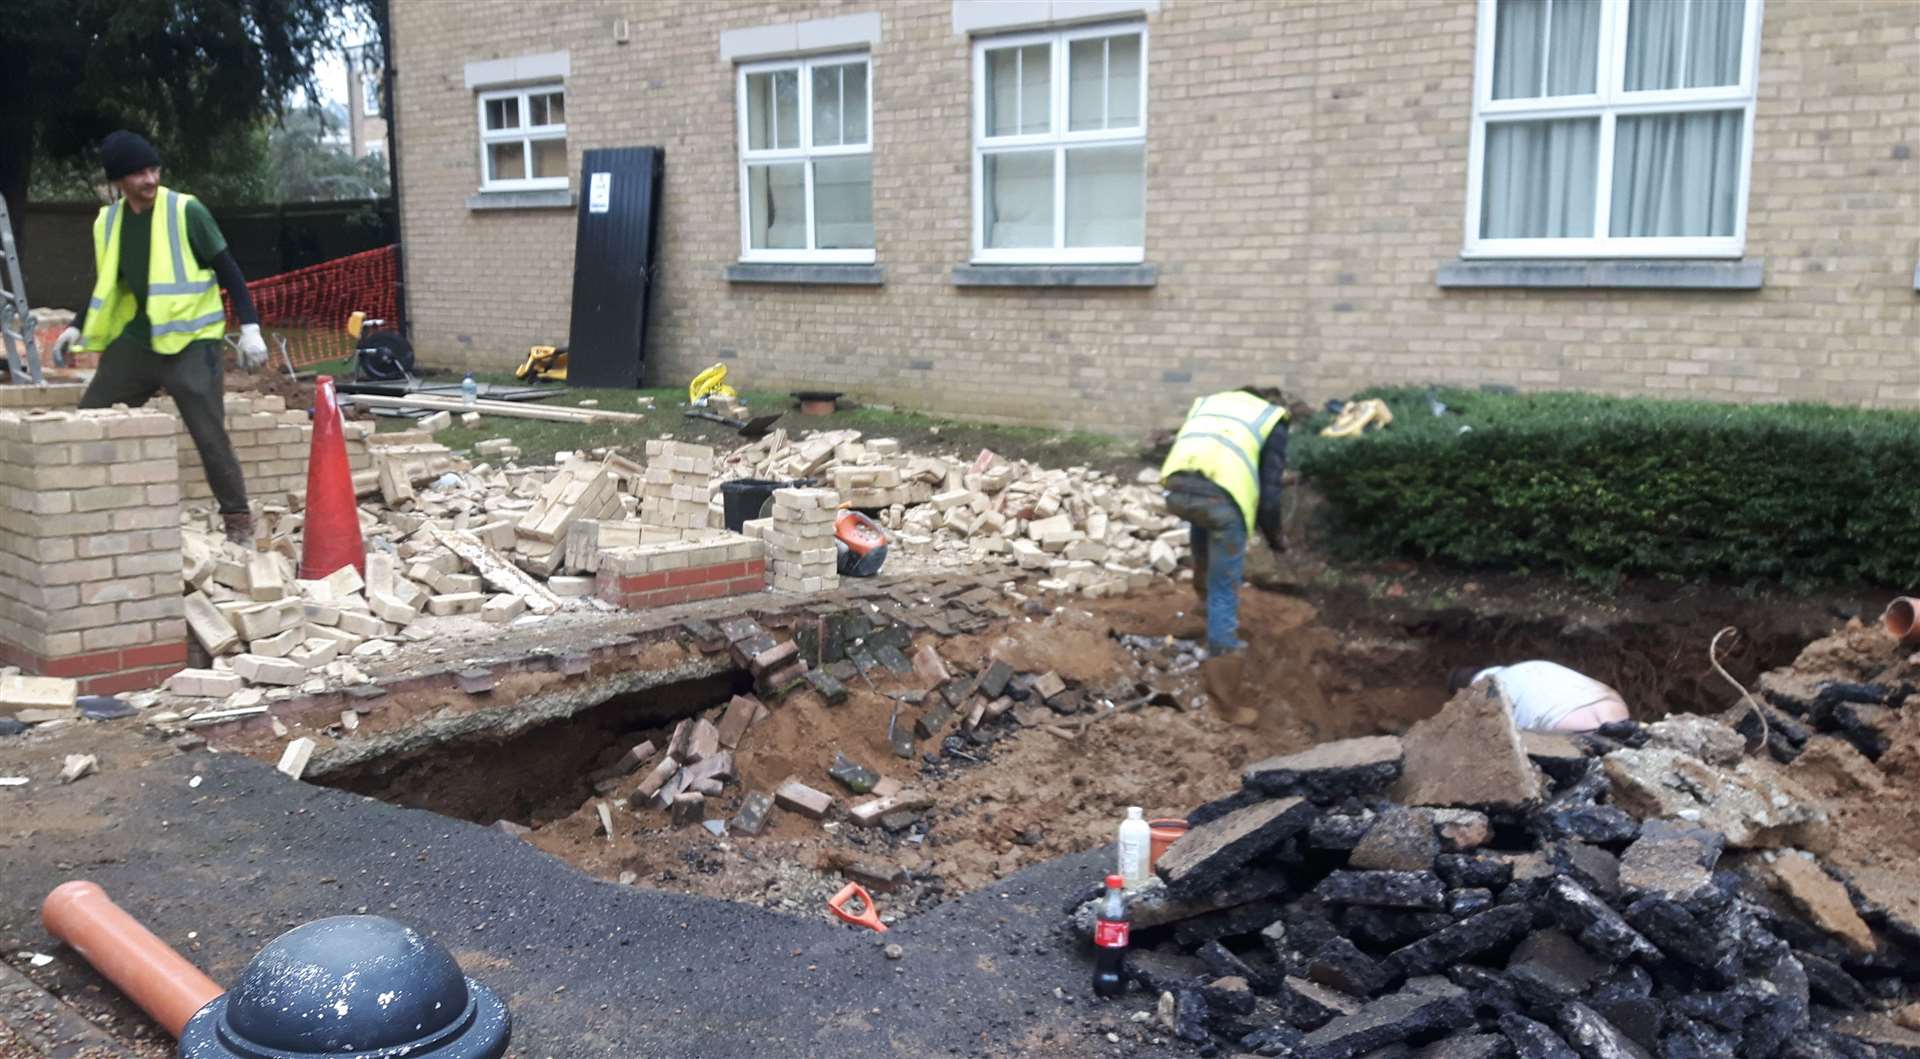 In November 2020, a hole appeared near a housing estate in Angelica Square, near Hermitage Lane, in Barming